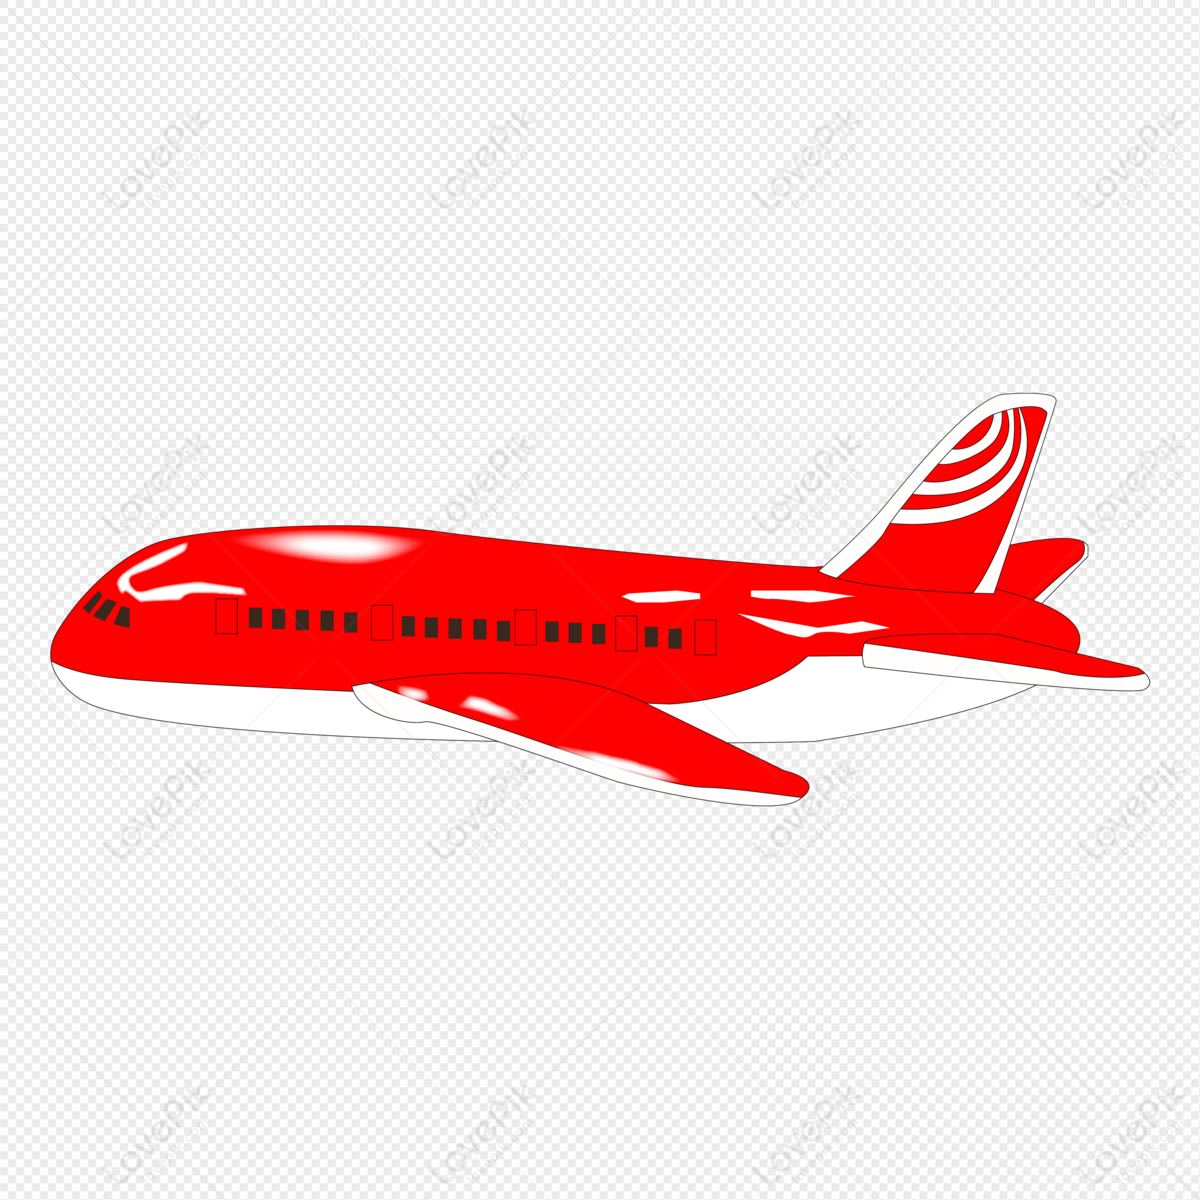 Cartoon Hand Drawn Red Airplane PNG Image Free Download And Clipart Image  For Free Download - Lovepik | 401430421